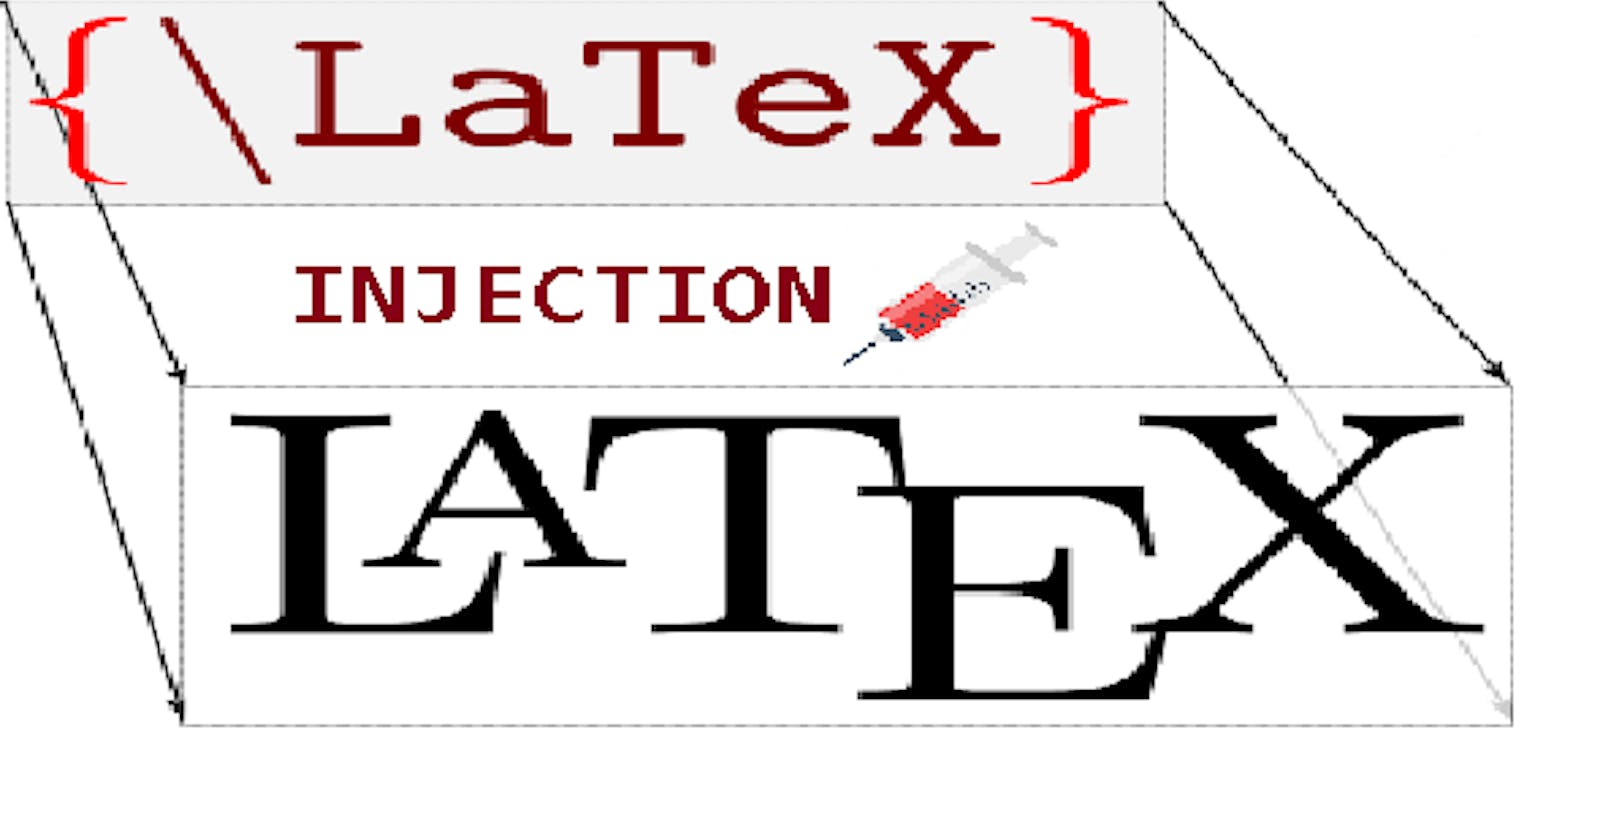 LaTex Injection Vulnerability